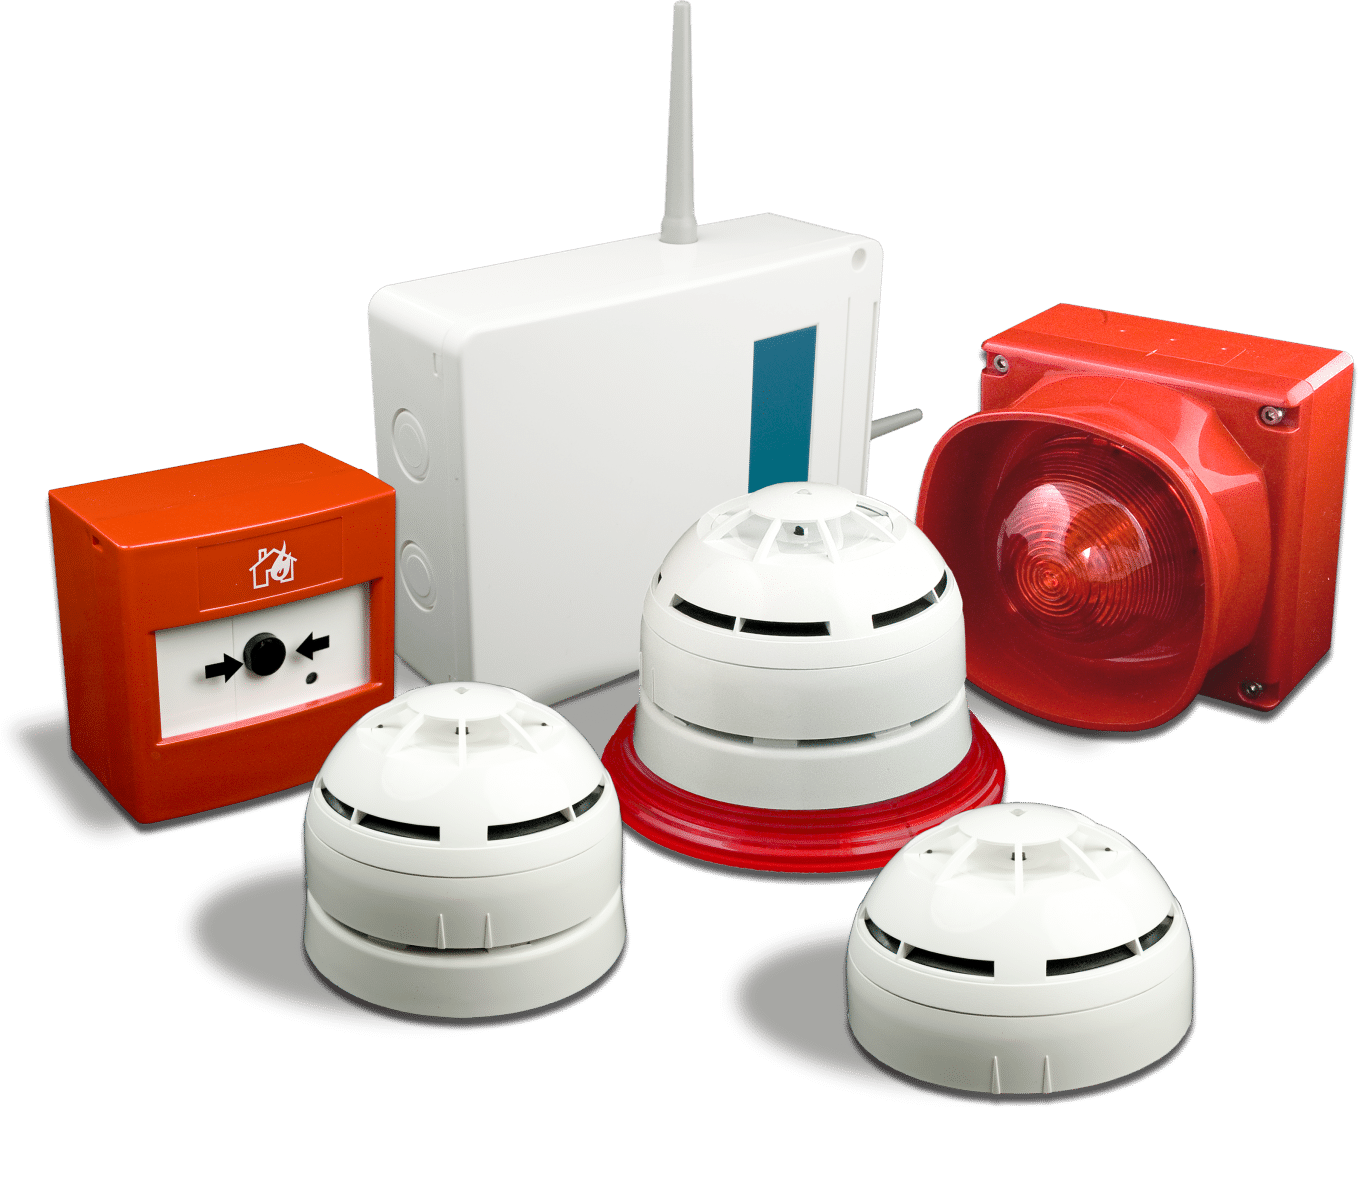 Fire protection and alerting systems